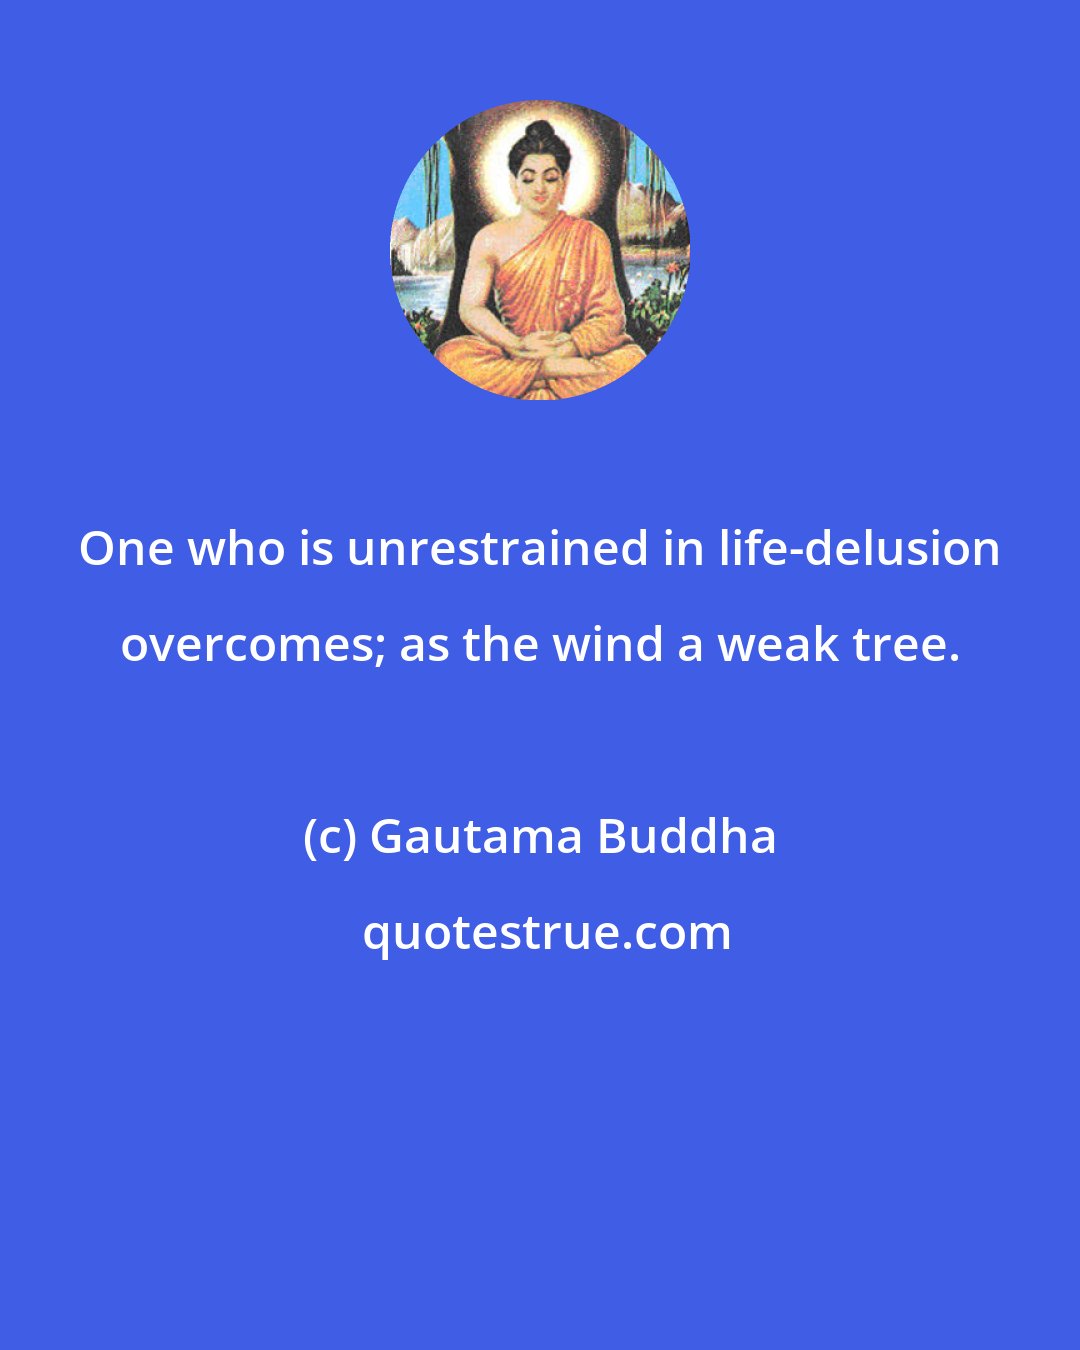 Gautama Buddha: One who is unrestrained in life-delusion overcomes; as the wind a weak tree.